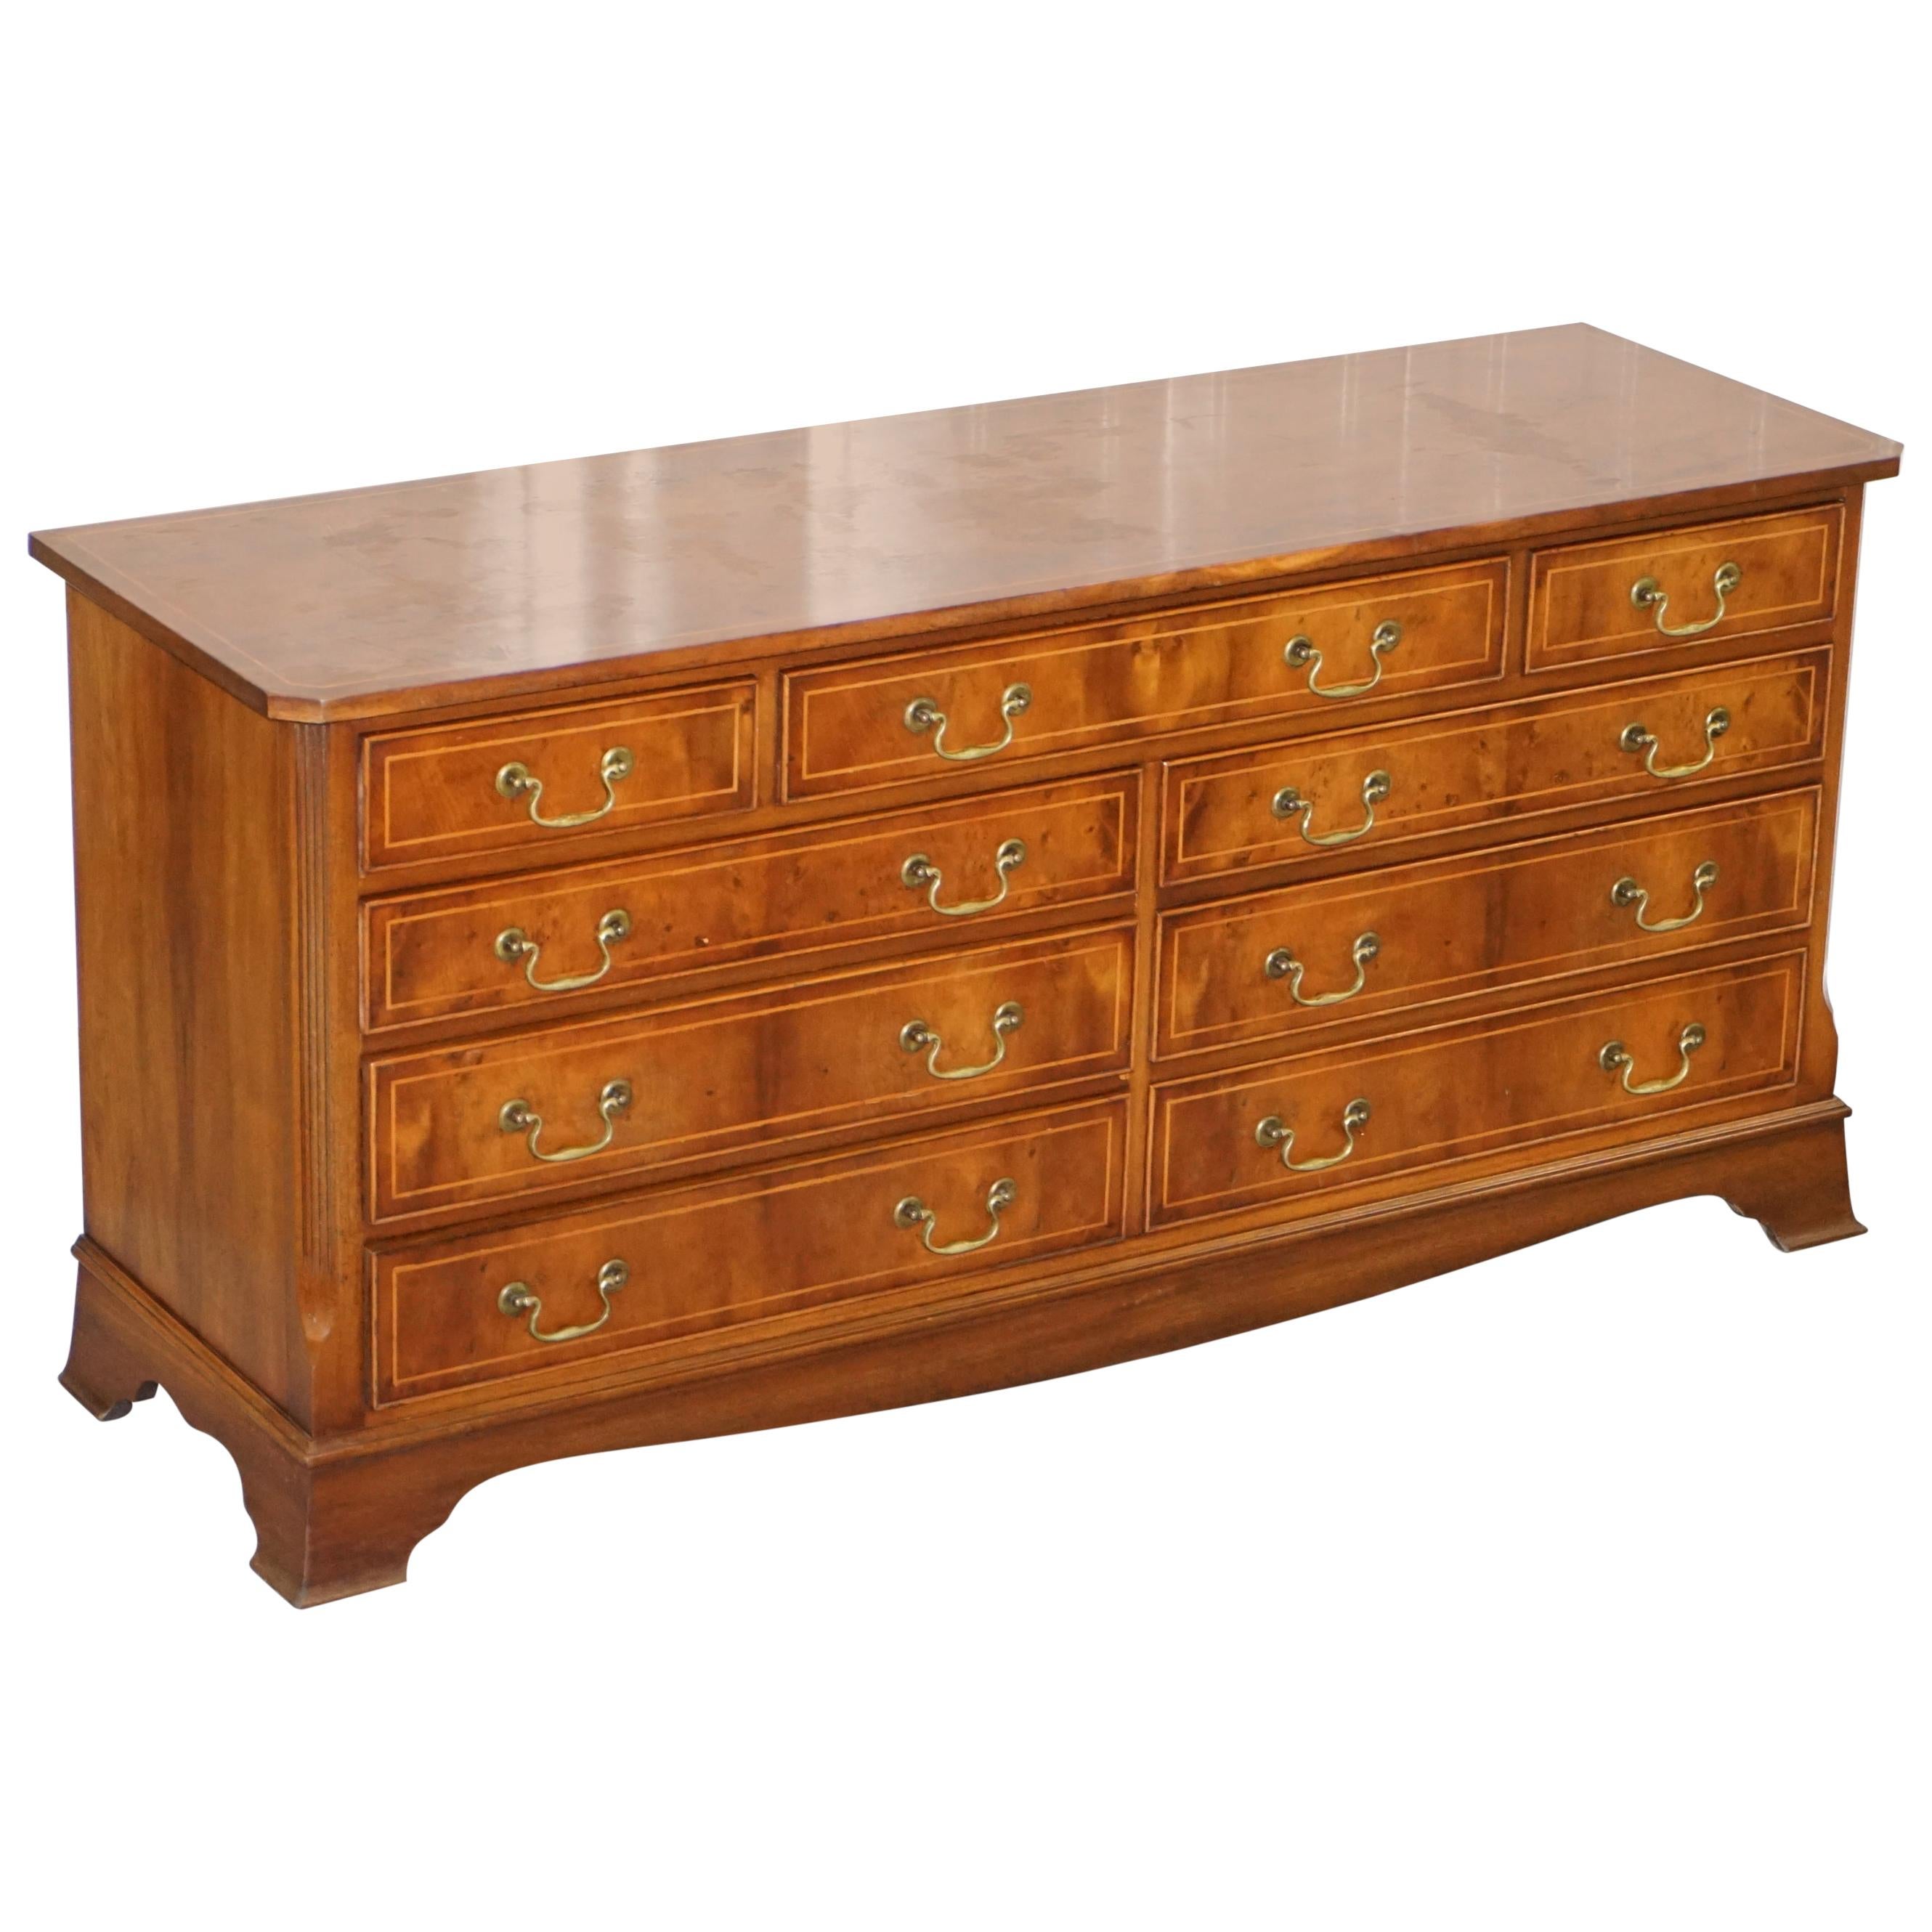 Vintage Bevan Funnell Burr Yew Wood Large Sideboard Sized Bank Chest of Drawers